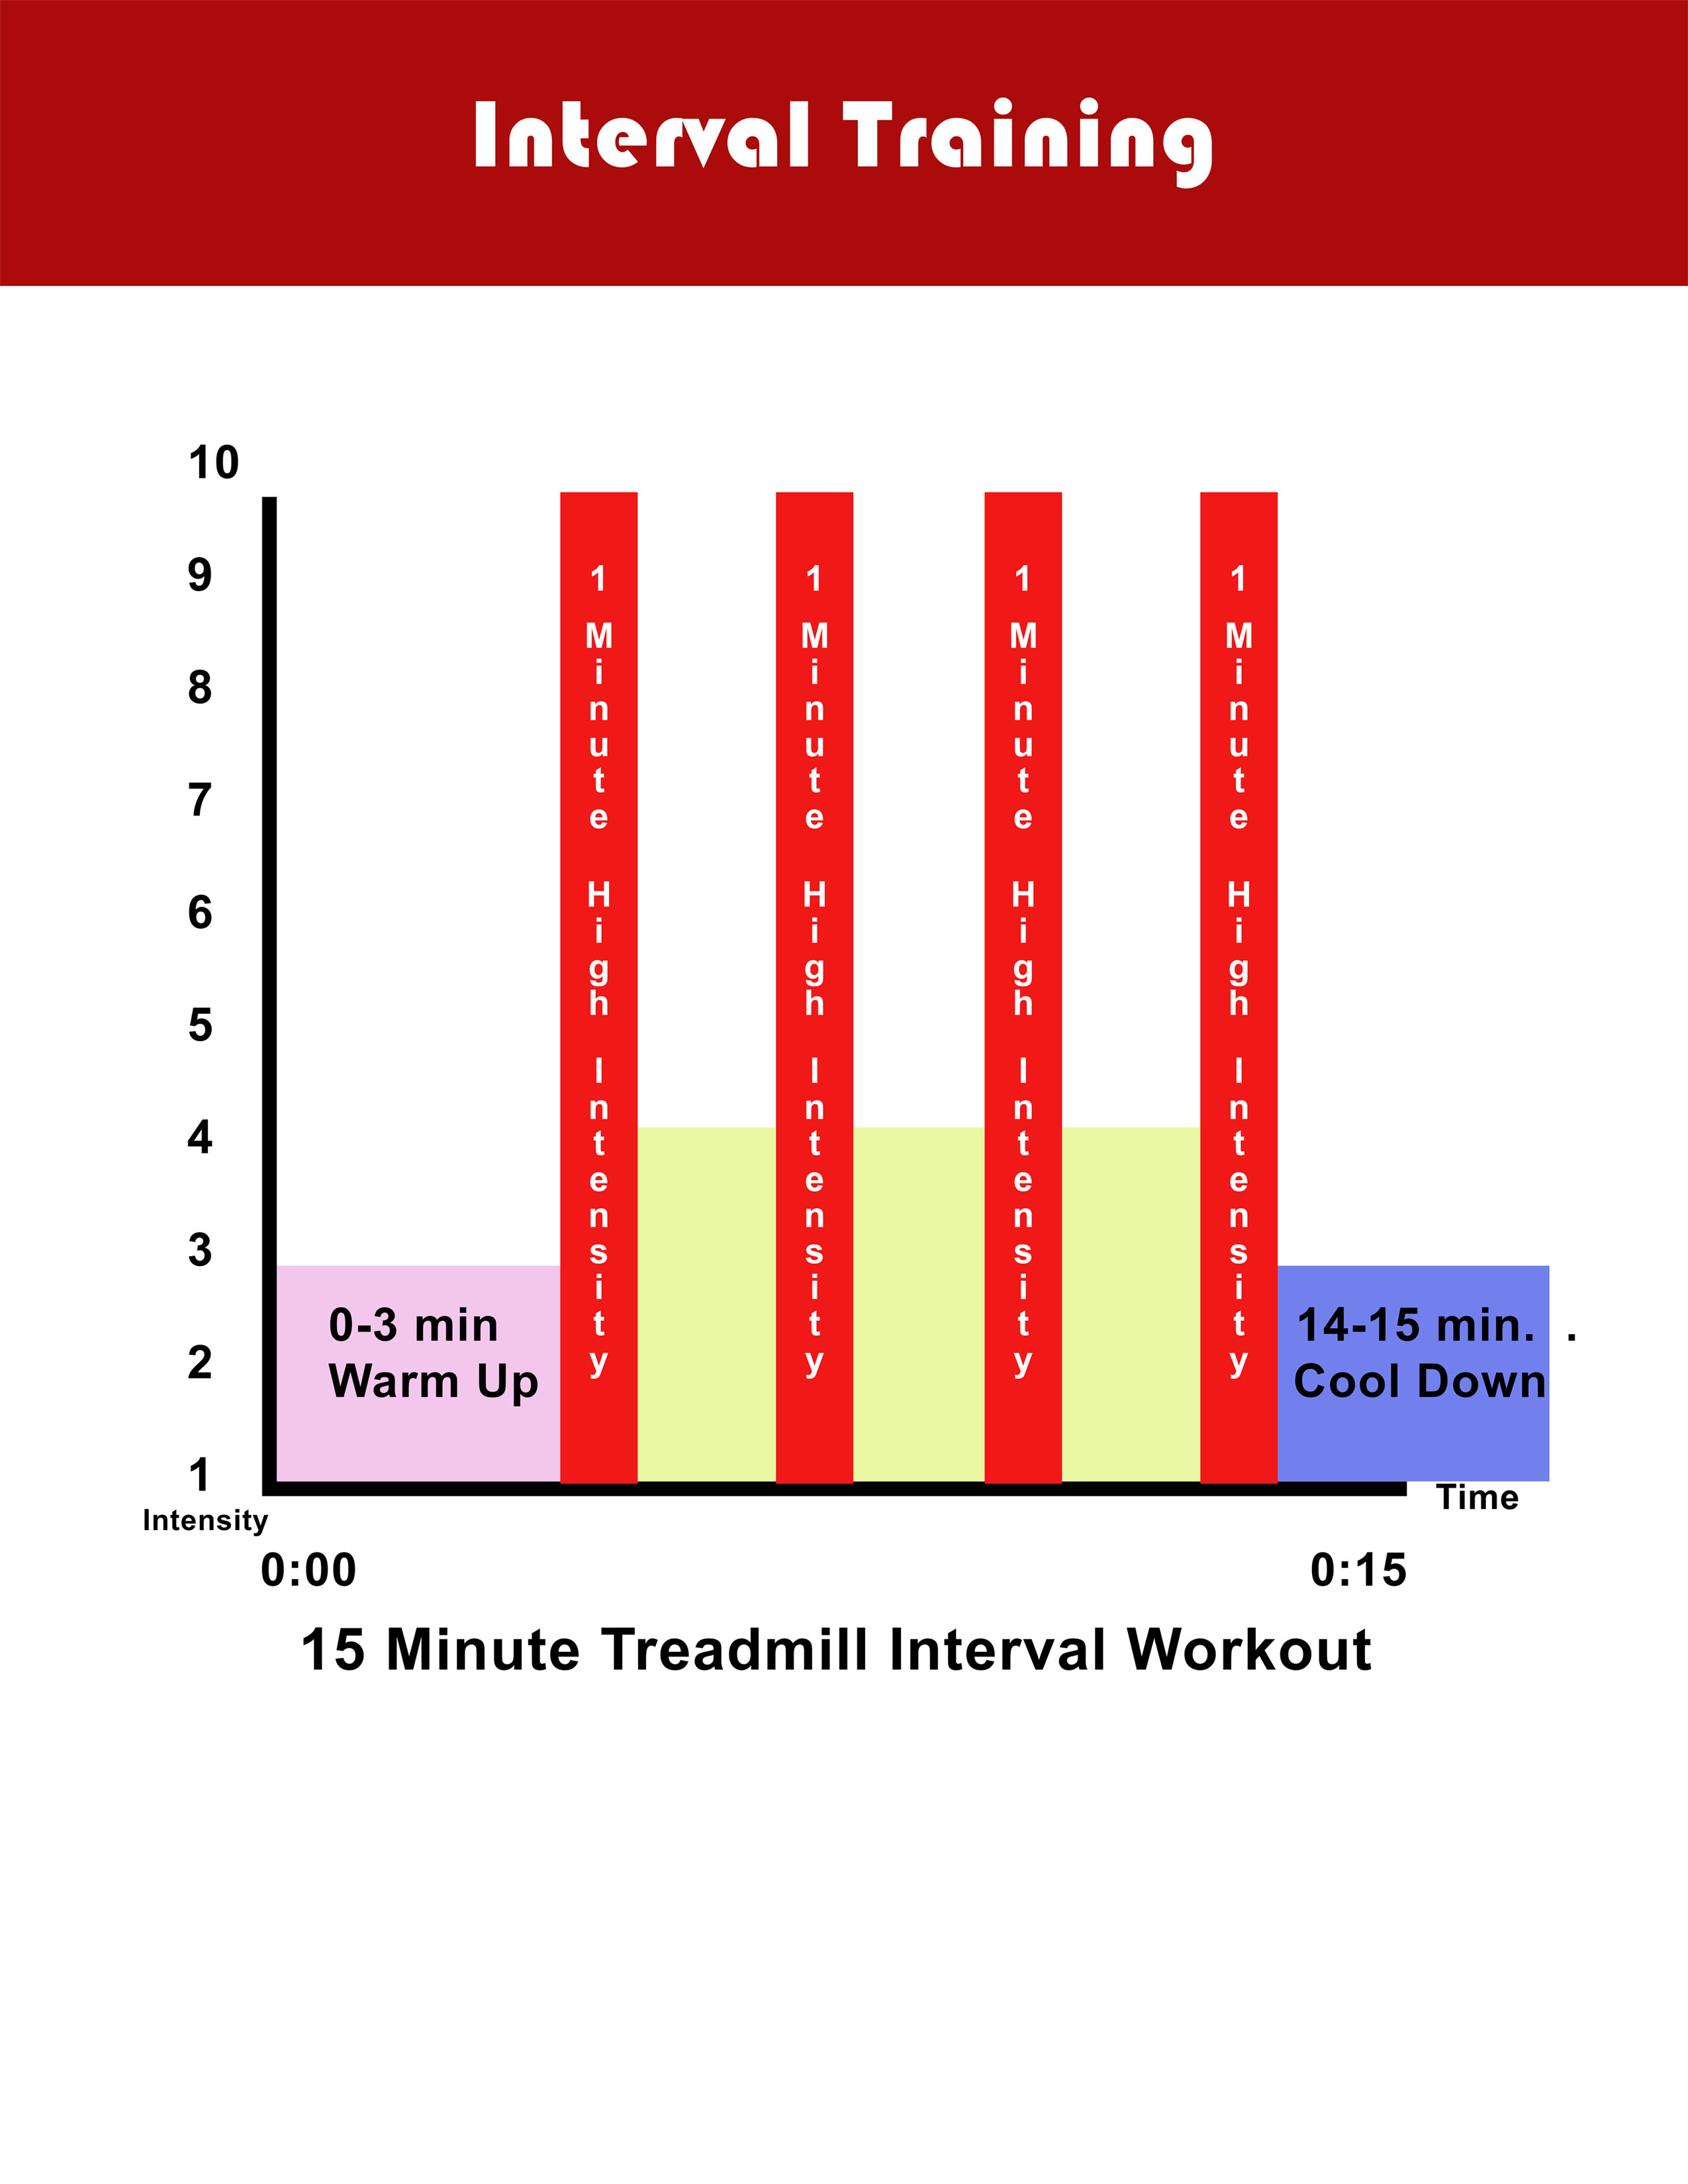 Interval training workout small poster you can download and printout.